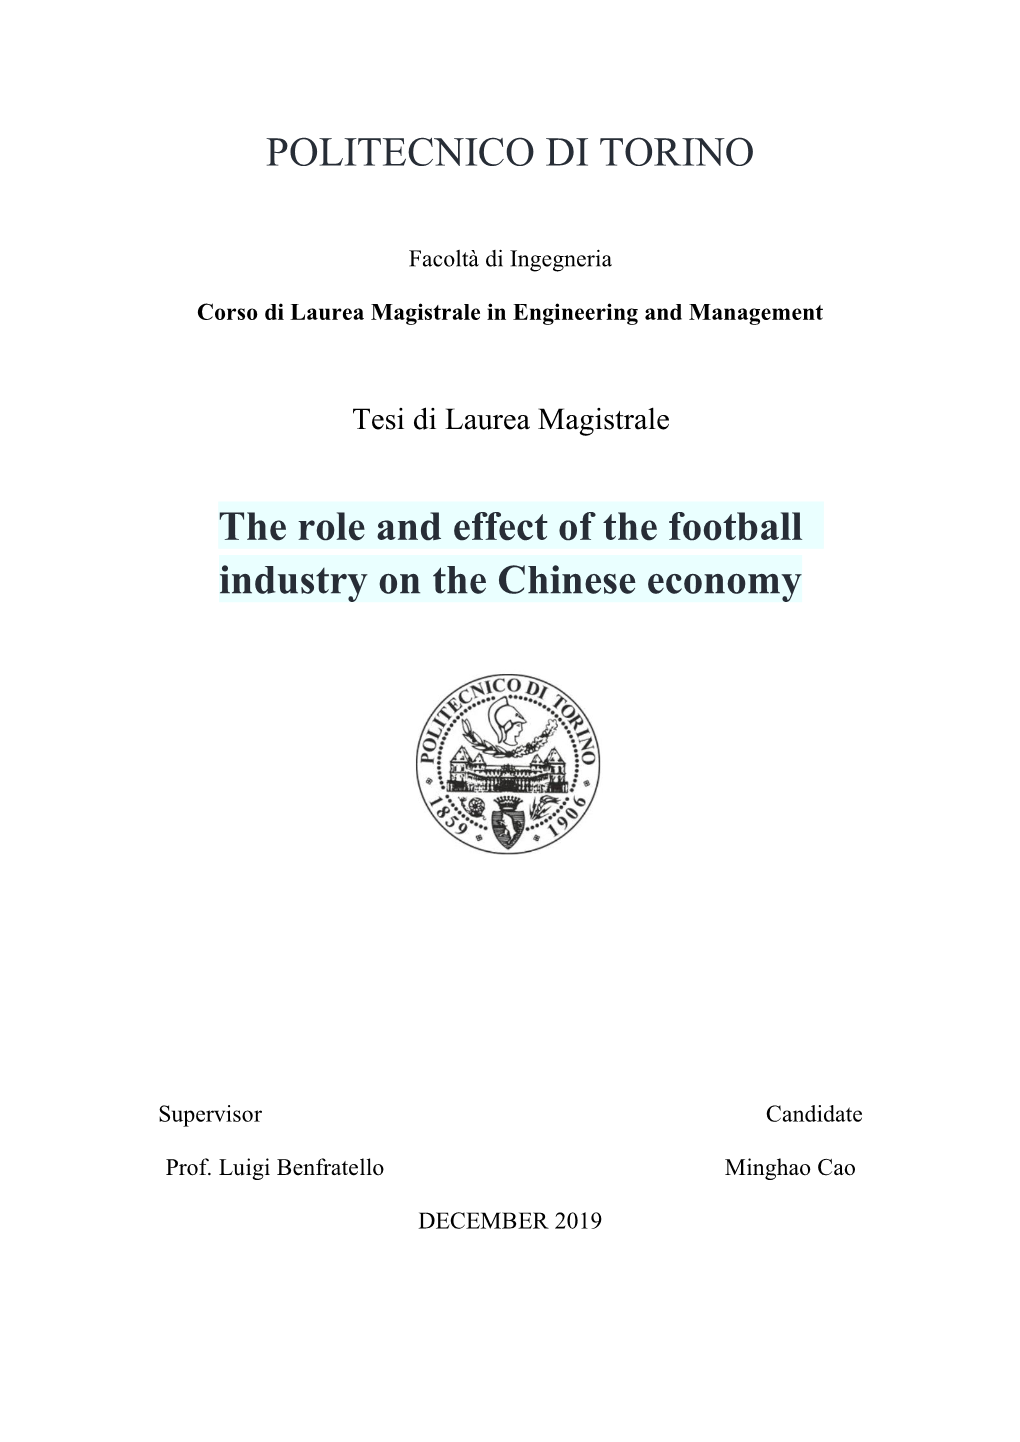 POLITECNICO DI TORINO the Role and Effect of the Football Industry On